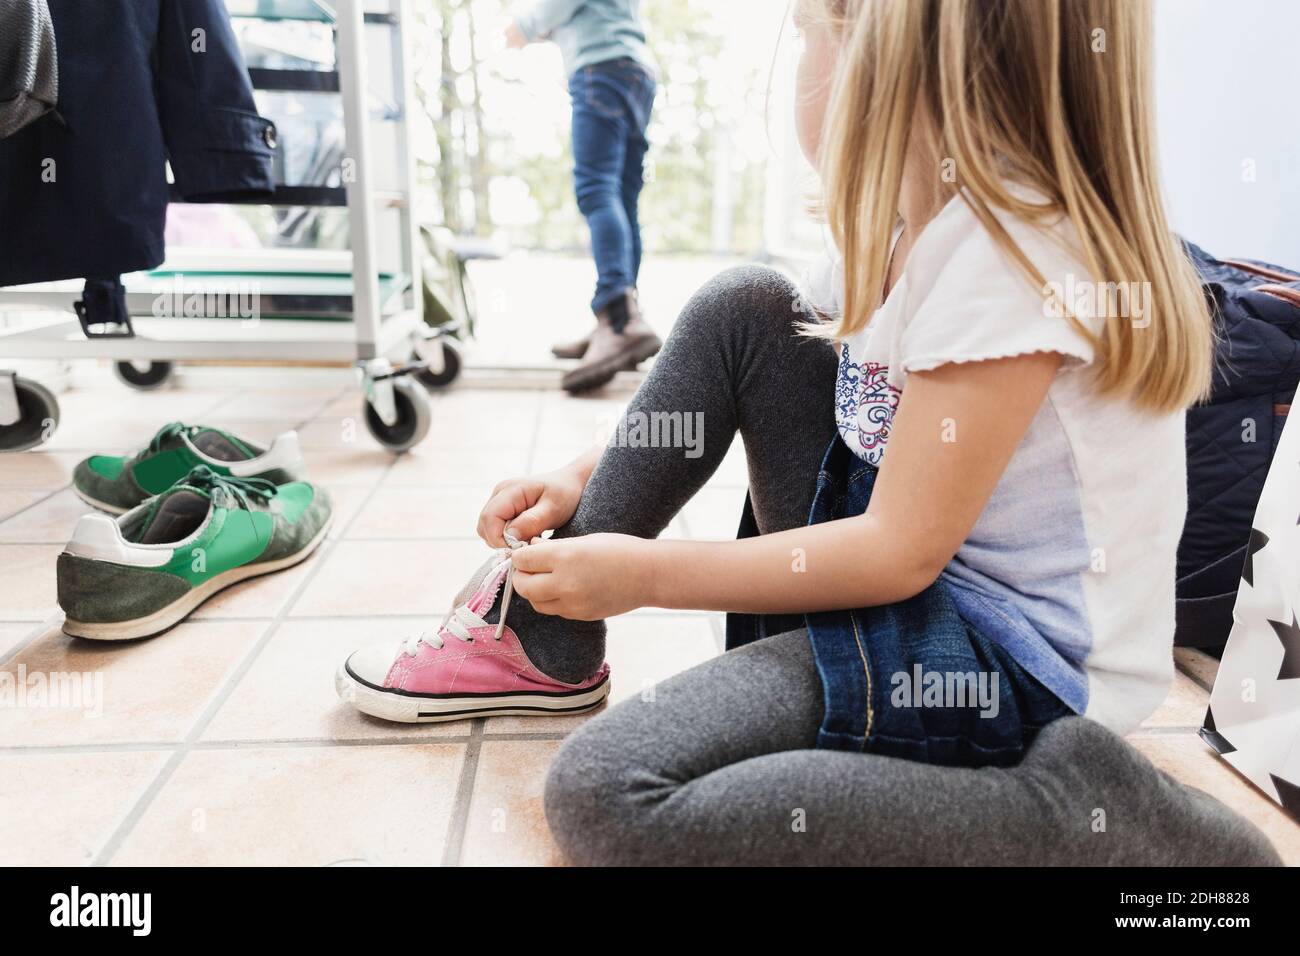 Girl wearing shoe while sitting on floor at day care center Stock Photo